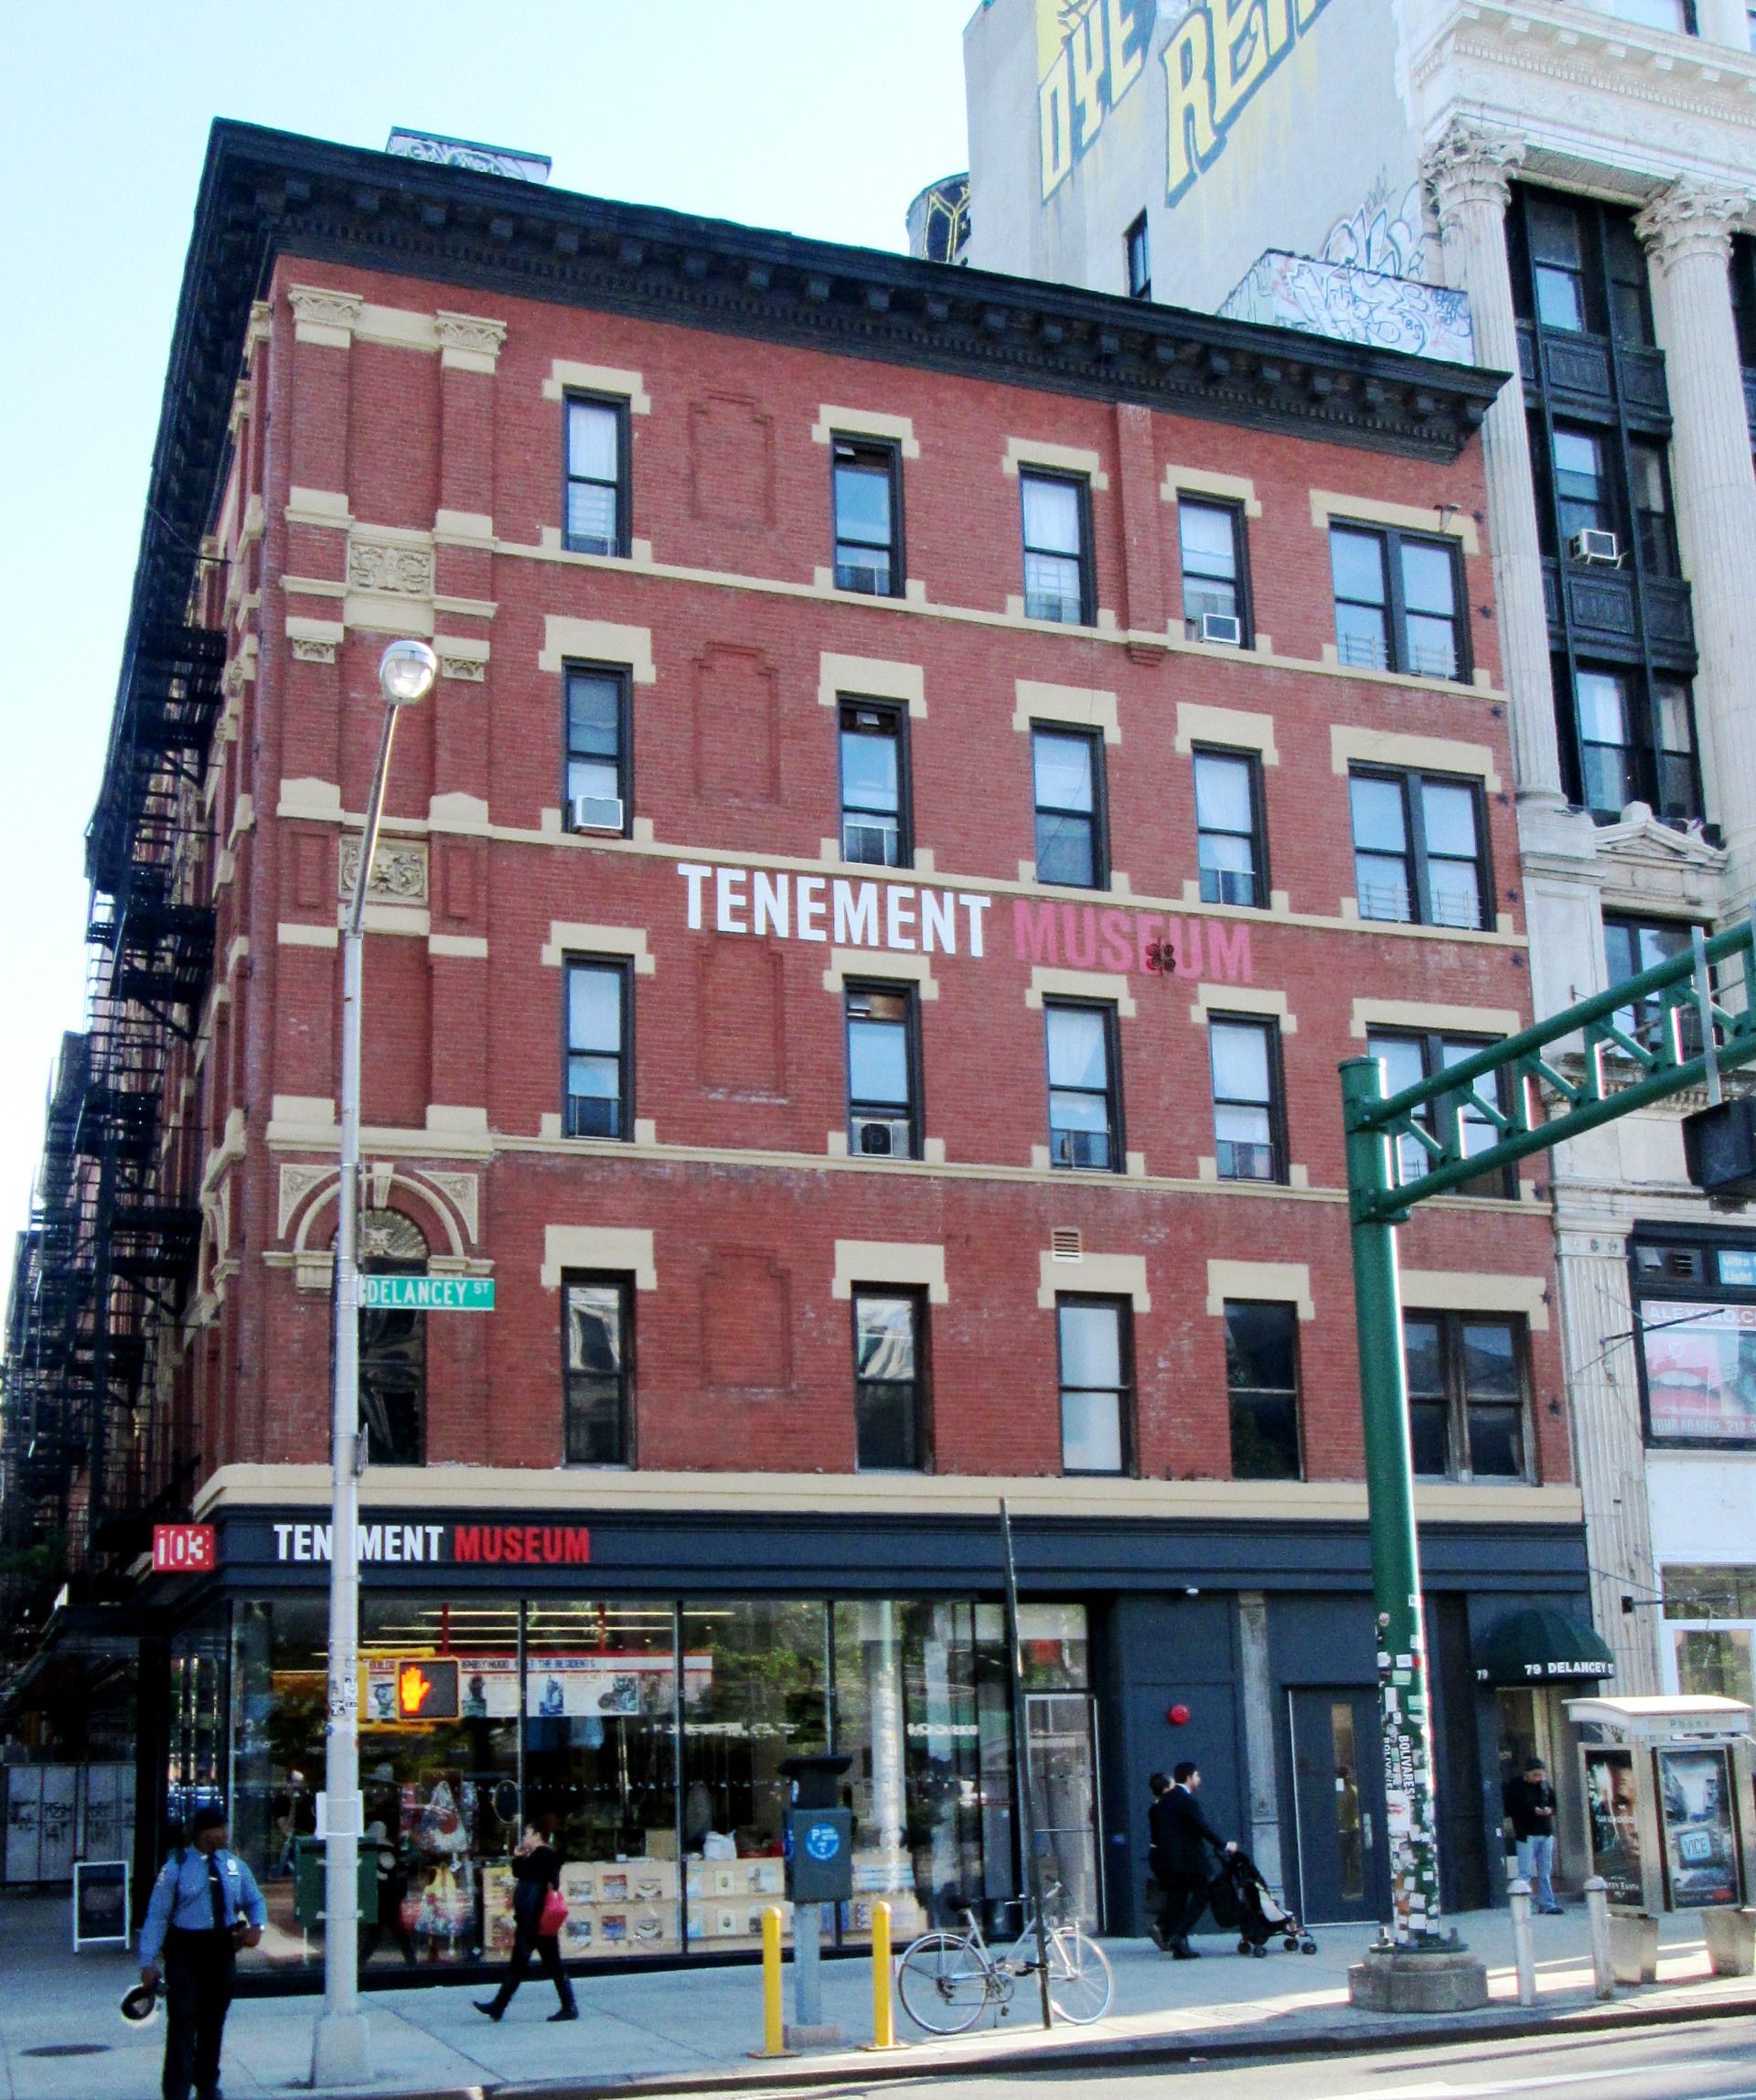 The Tenement Museum on the Lower East Side of Manhattan, which has struggled financially and now allows just eight people at a time to enter its historic buildings 